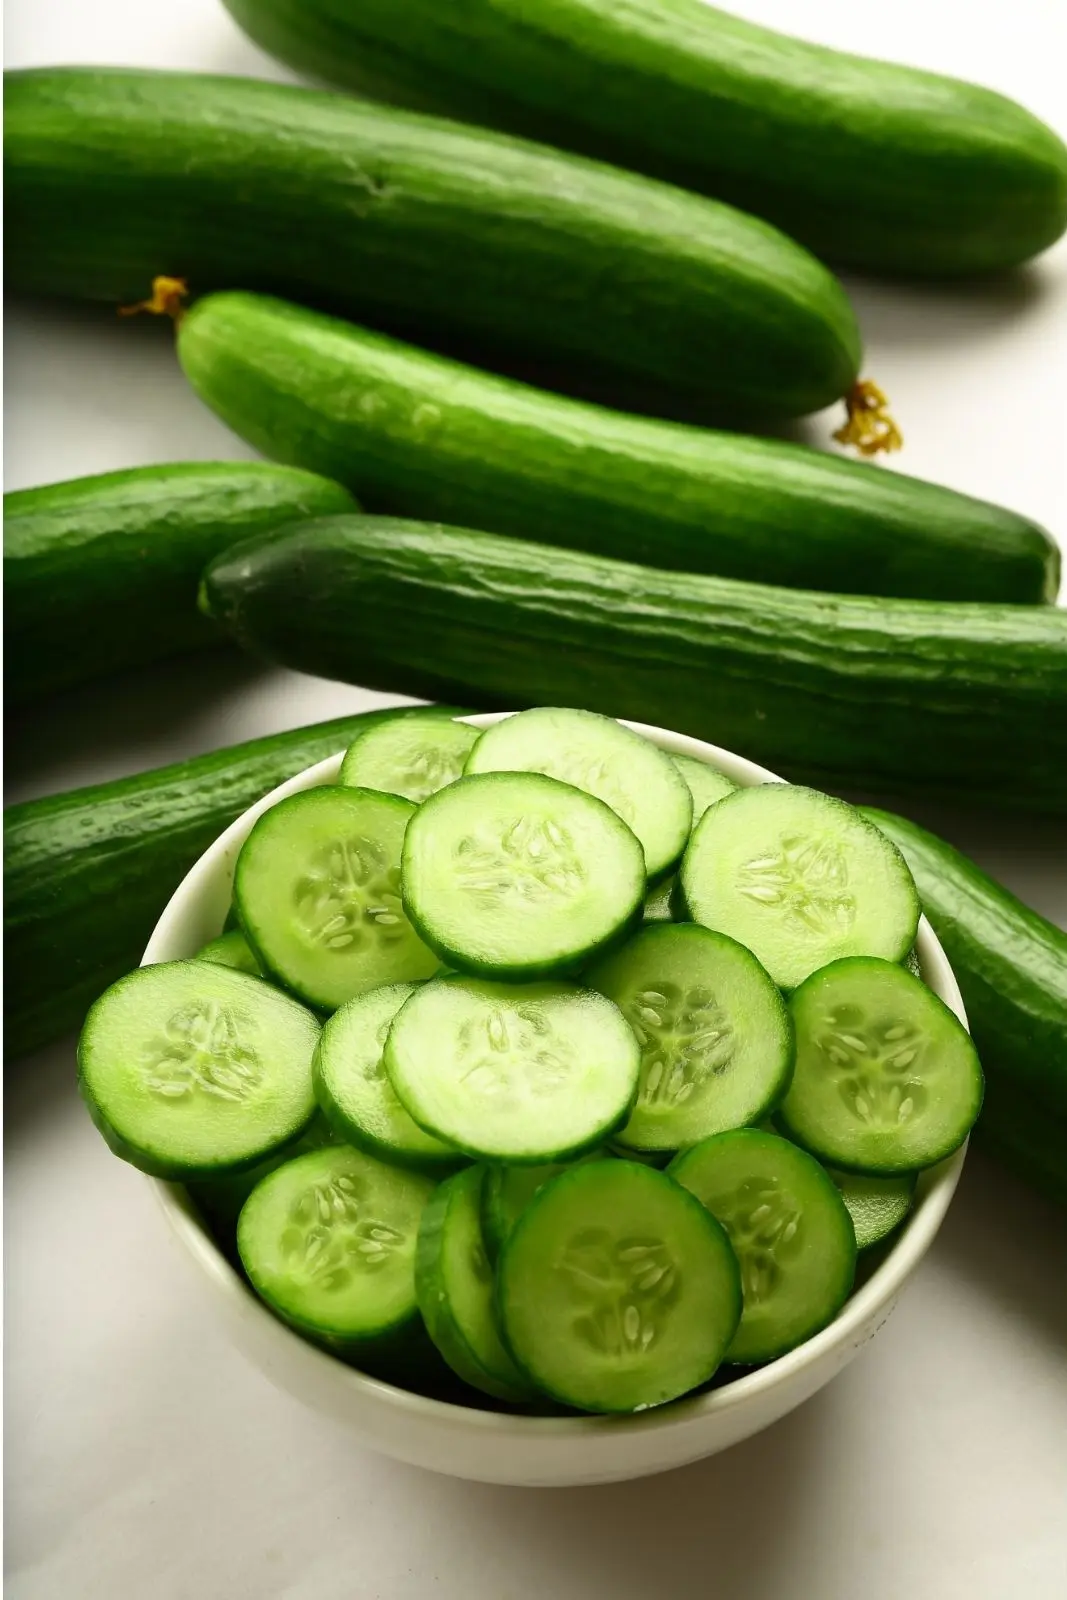 sliced cucumbers in a bowl with whole cucumbers